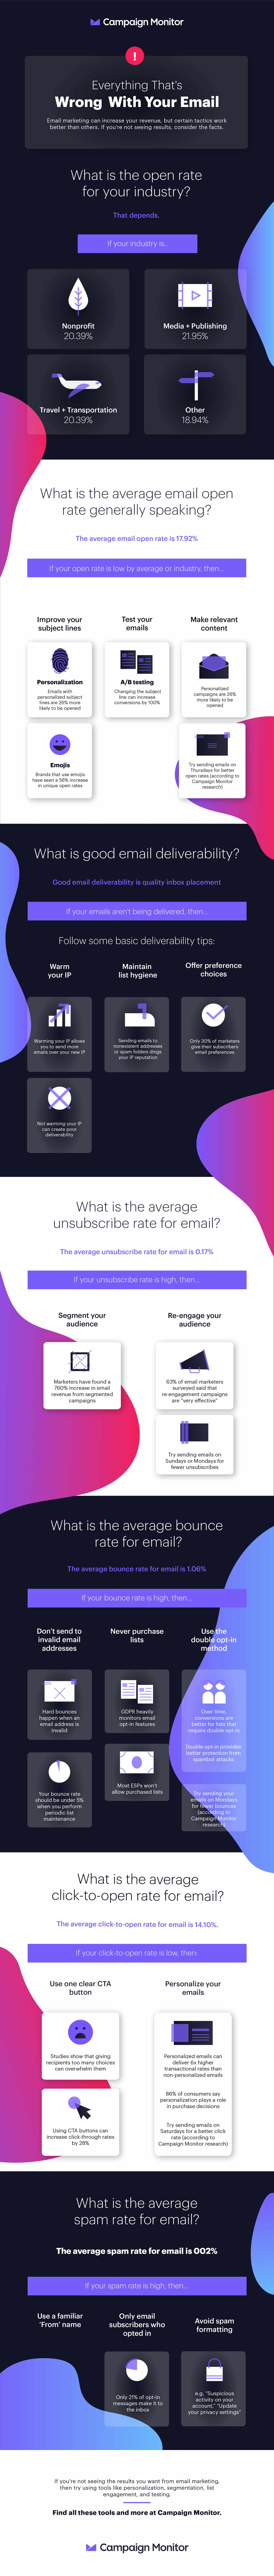 Everything that's wrong with your email infographic. This infographic includes open rates statistics, click rate stats, email data, and email statistics by industry. Use this infographic to learn what's wrong with your emails and improve them.